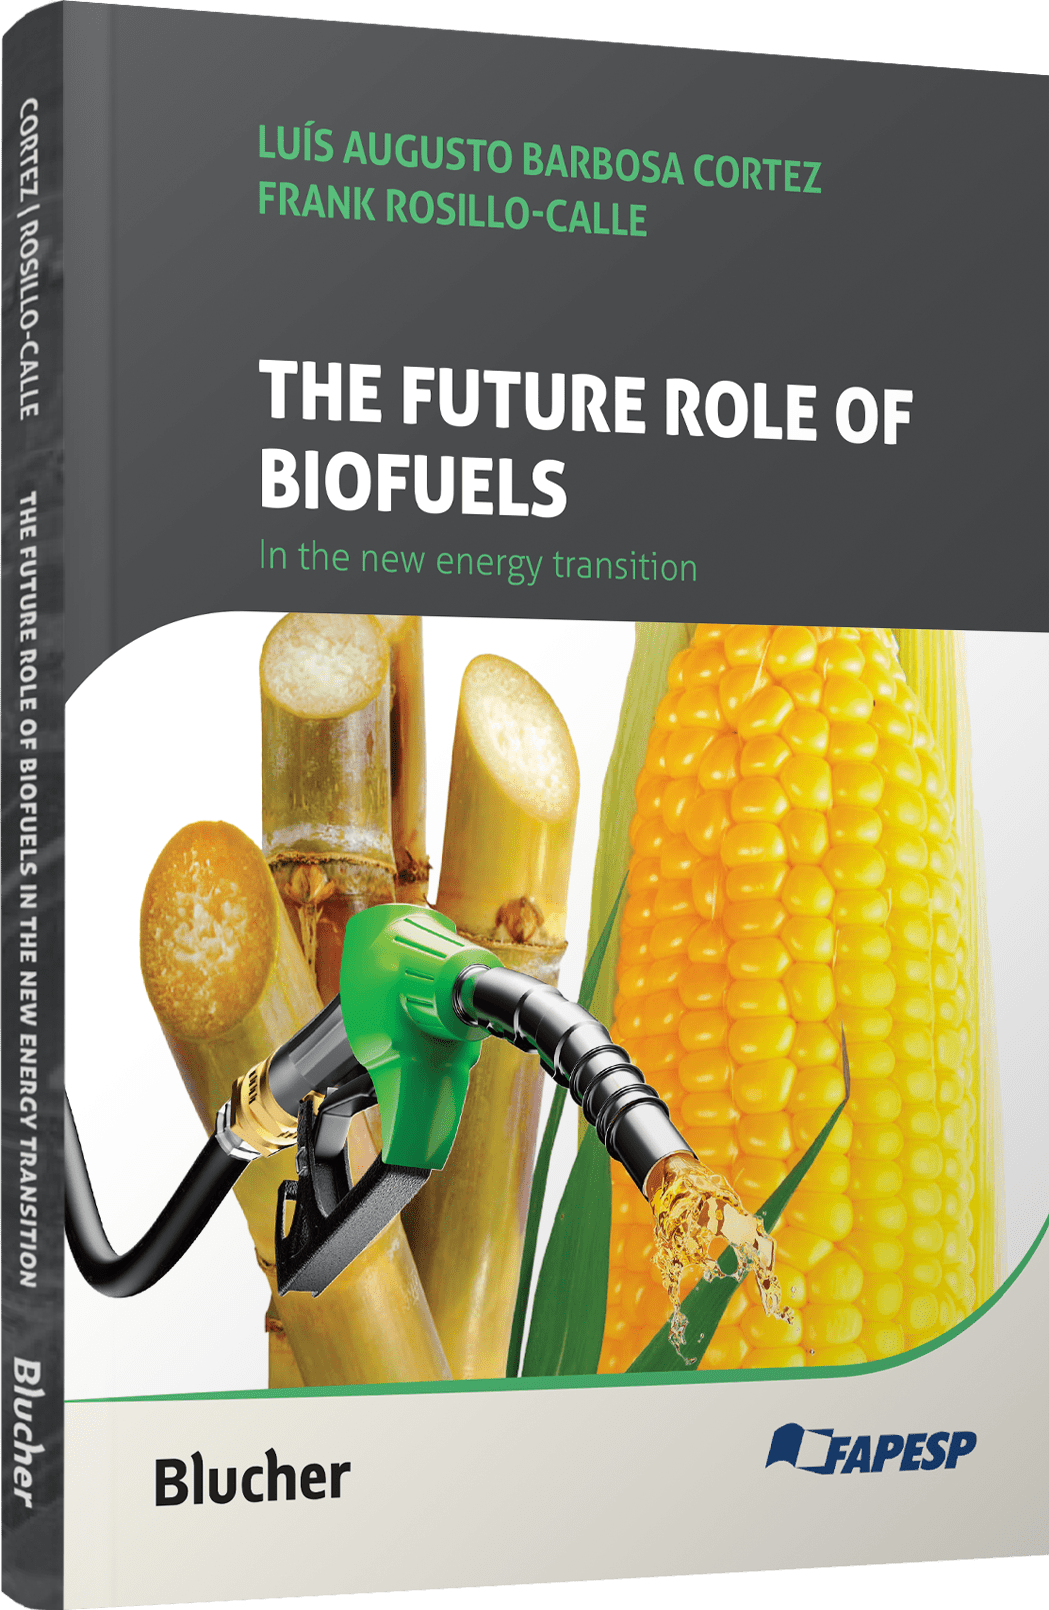 The Future Role of Biofuels in the New Energy Transition